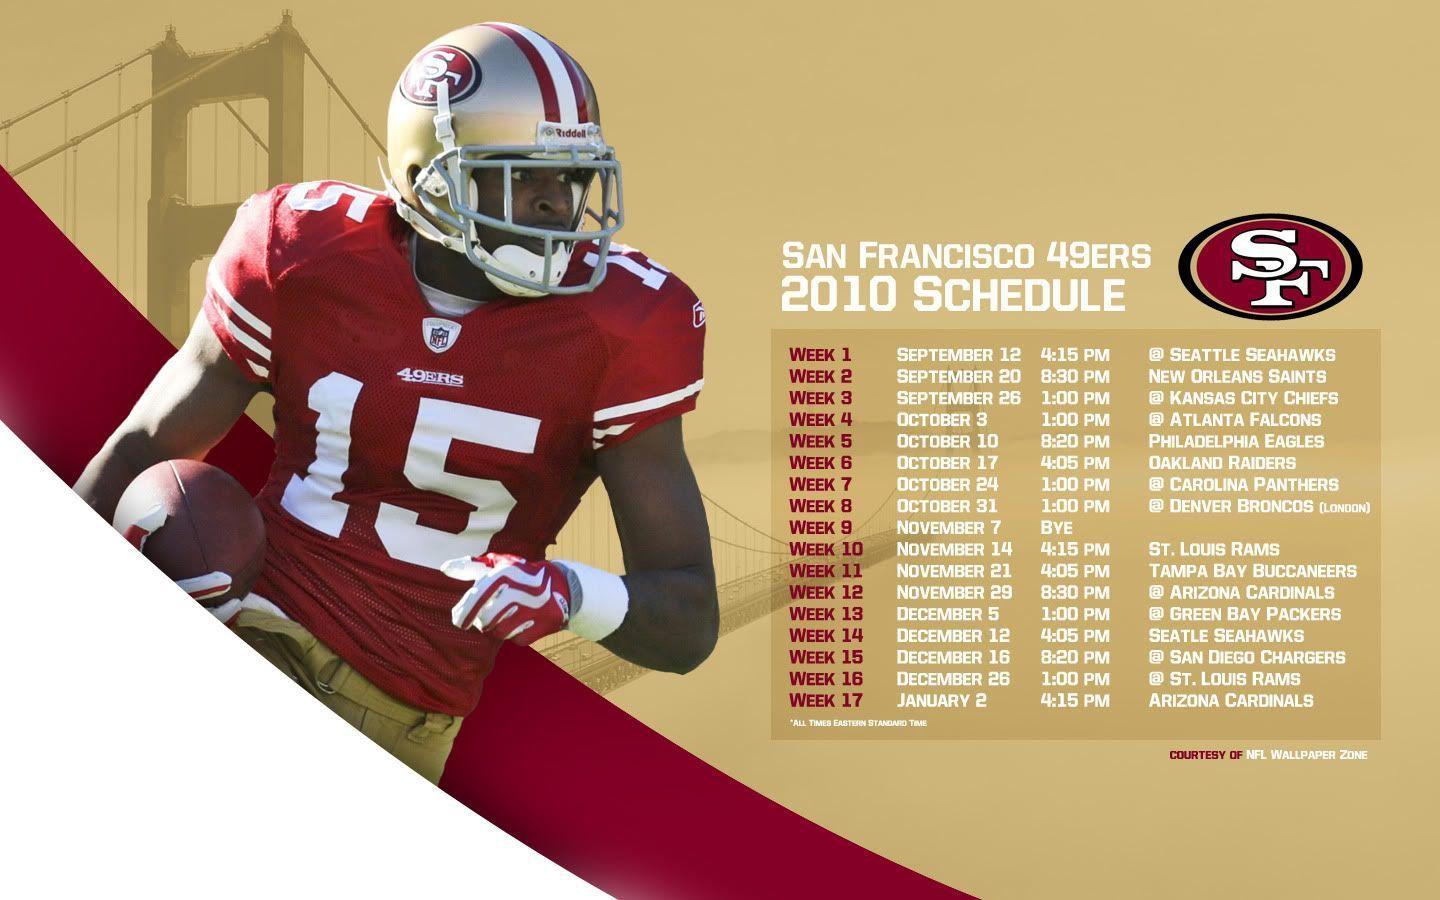 NFL Wallpapers Zone: SF / San Francisco 49ers 2010 Schedule